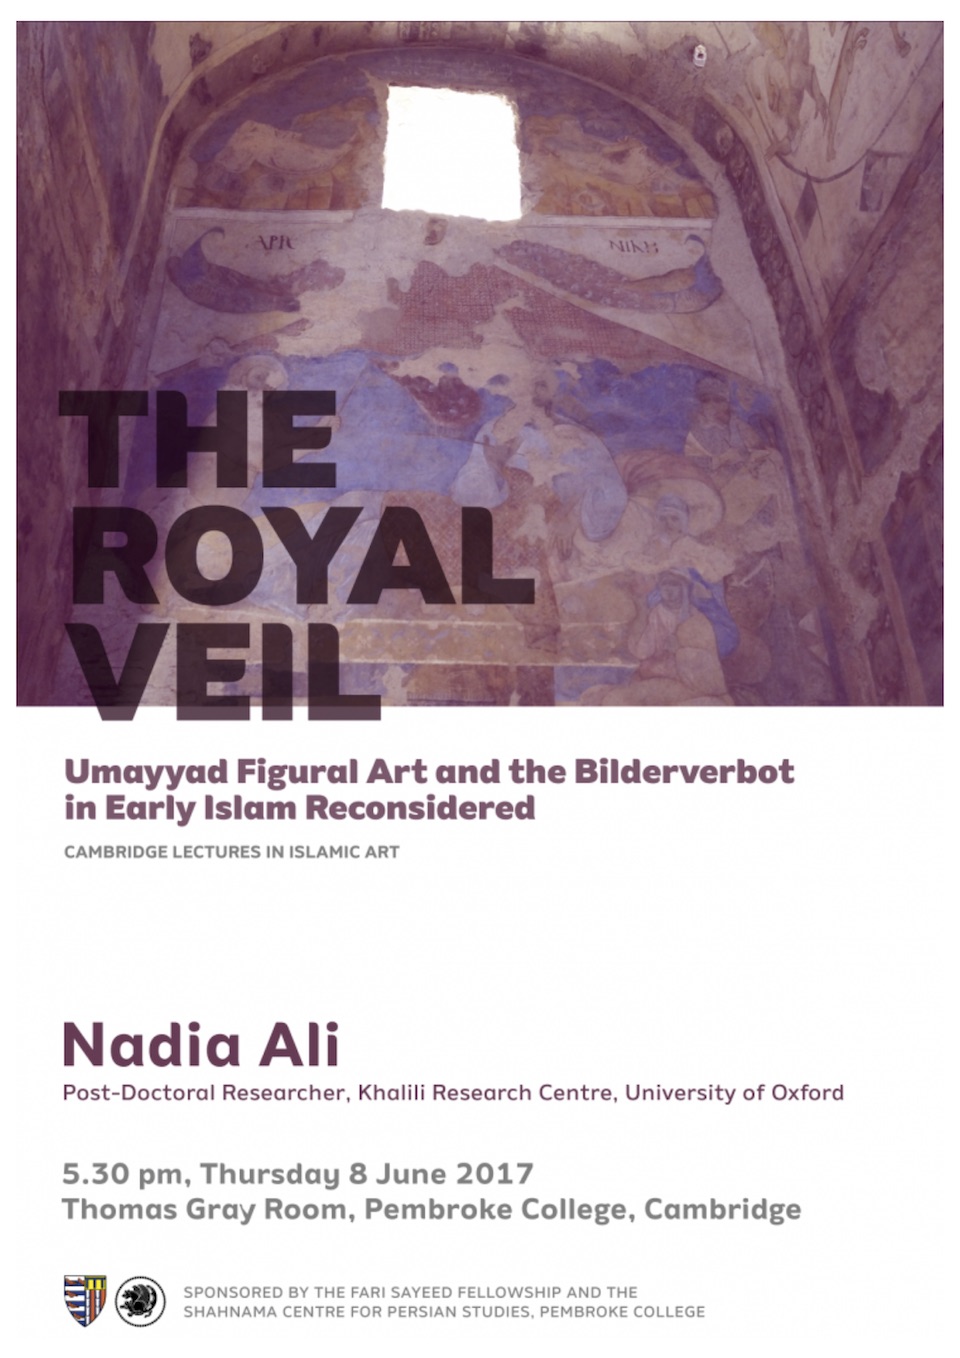 The Royal Veil: Umayyad figural art and the Bilderverbot in early Islam reconsidered's image